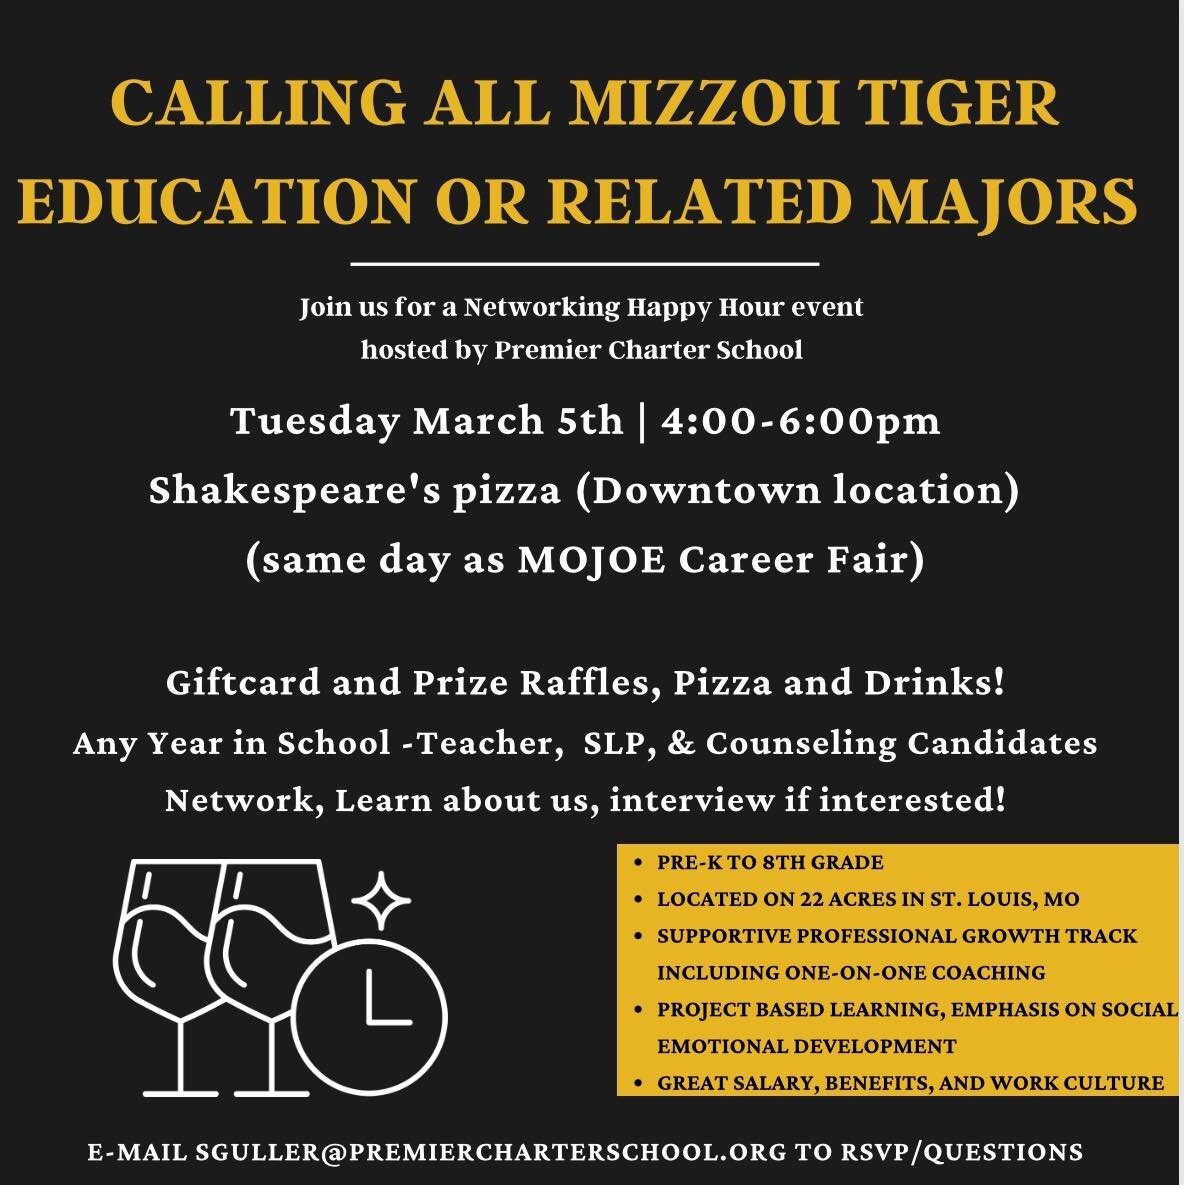 ATTENTION ALL MIZZOU TIGER EDUCATION/RELATED MAJORS ‼️

Premier Charter School is hosting a Networking Happy Hour event this upcoming Tuesday, March 5th at the Shakespeare&rsquo;s pizza downtown location (Same day dad the MOJOE Career Fair)

Come on 